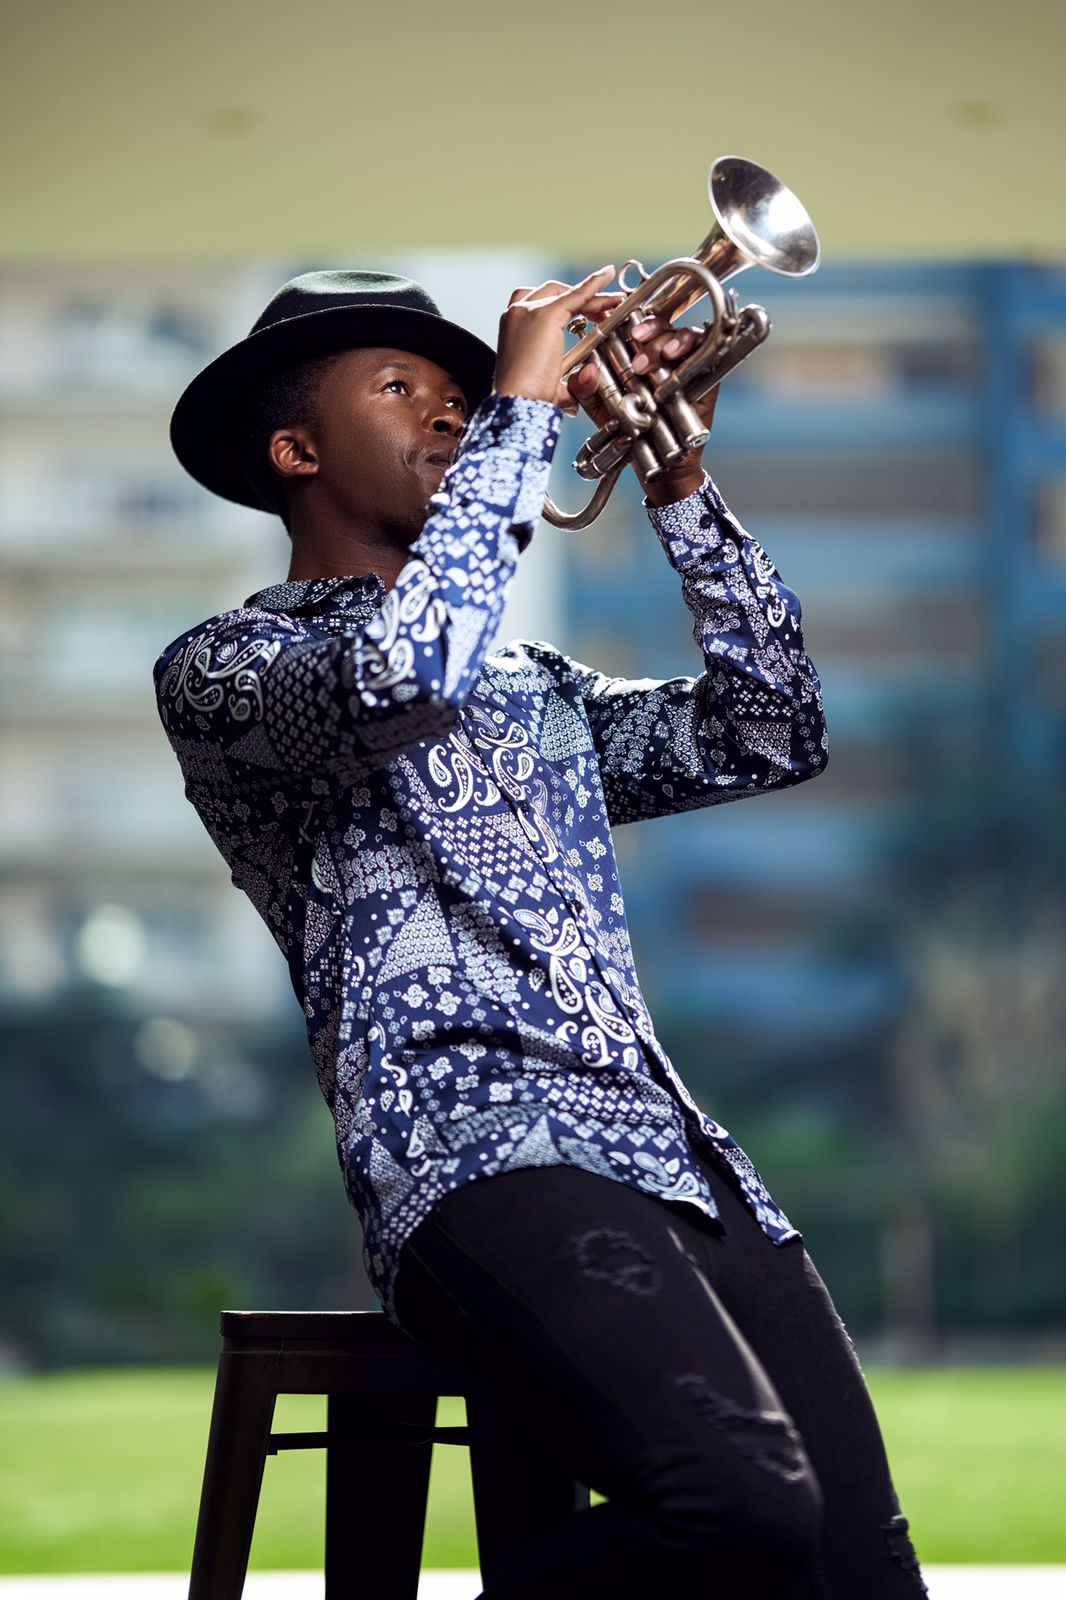 Sandile Masilela: Pioneering African Jazz and Fusion Sounds from South Africa.